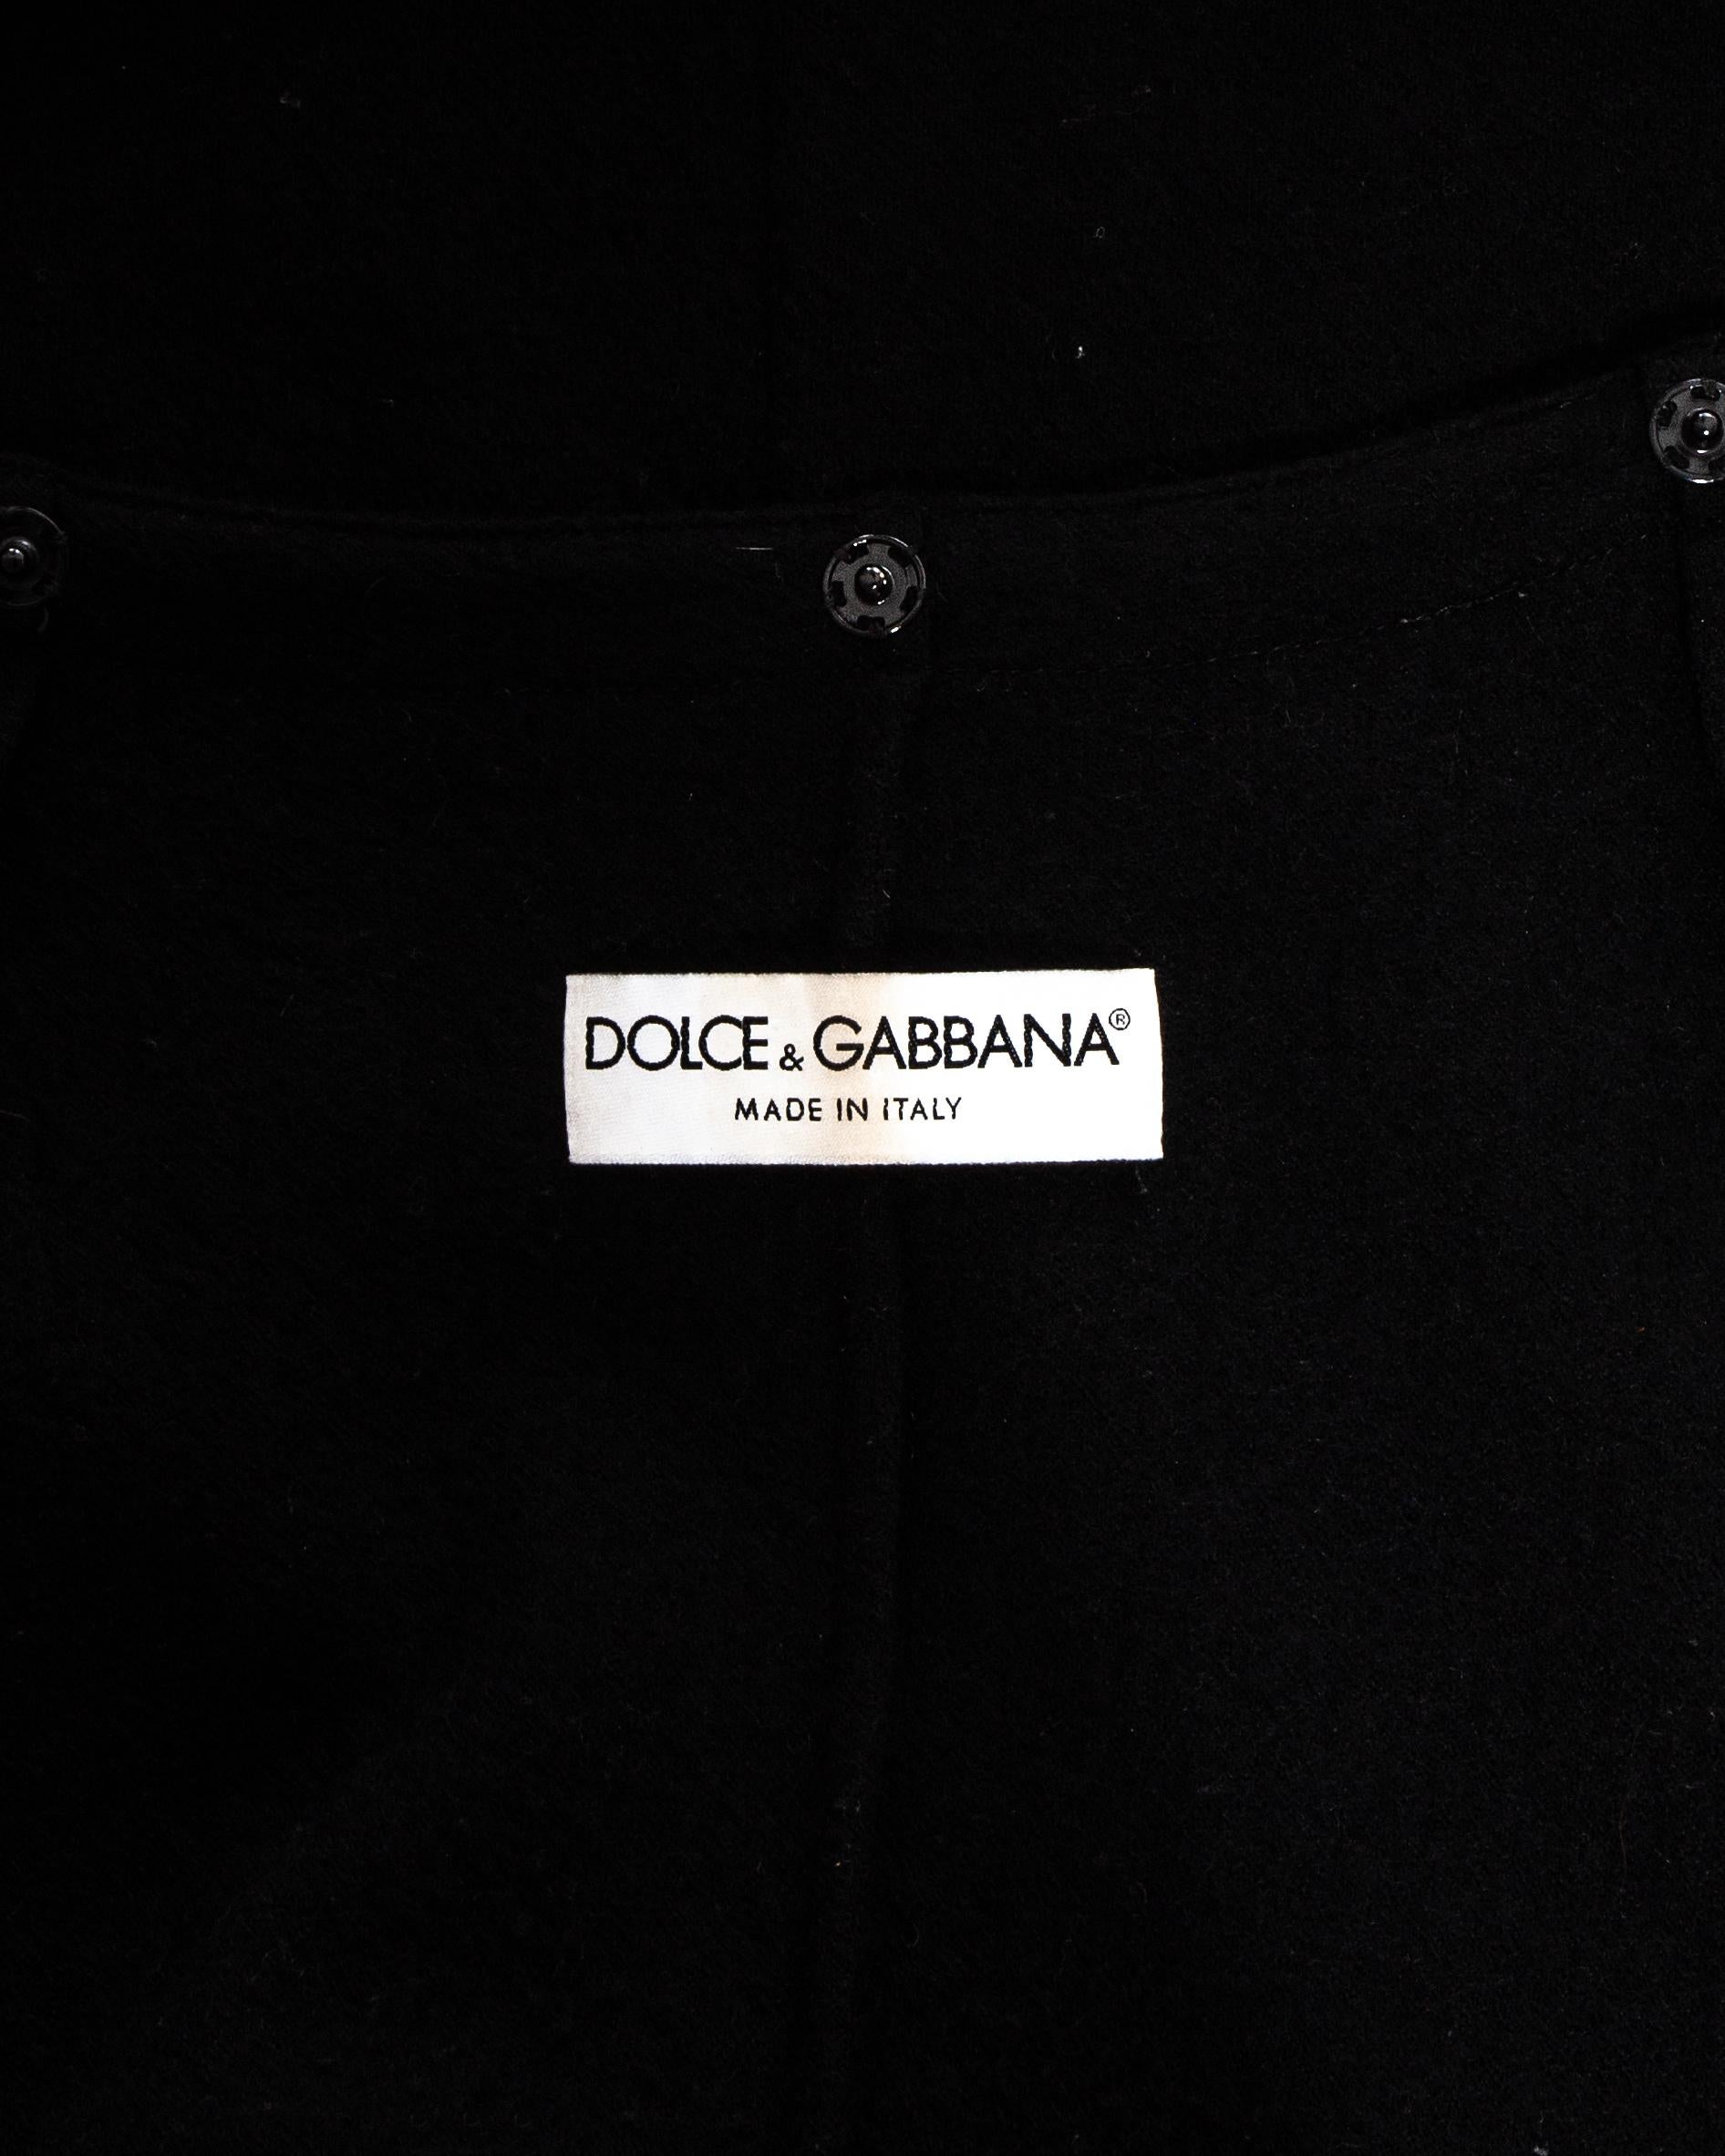 Dolce & Gabbana black lace evening coat with mink fur collar, fw 1997 For Sale 1